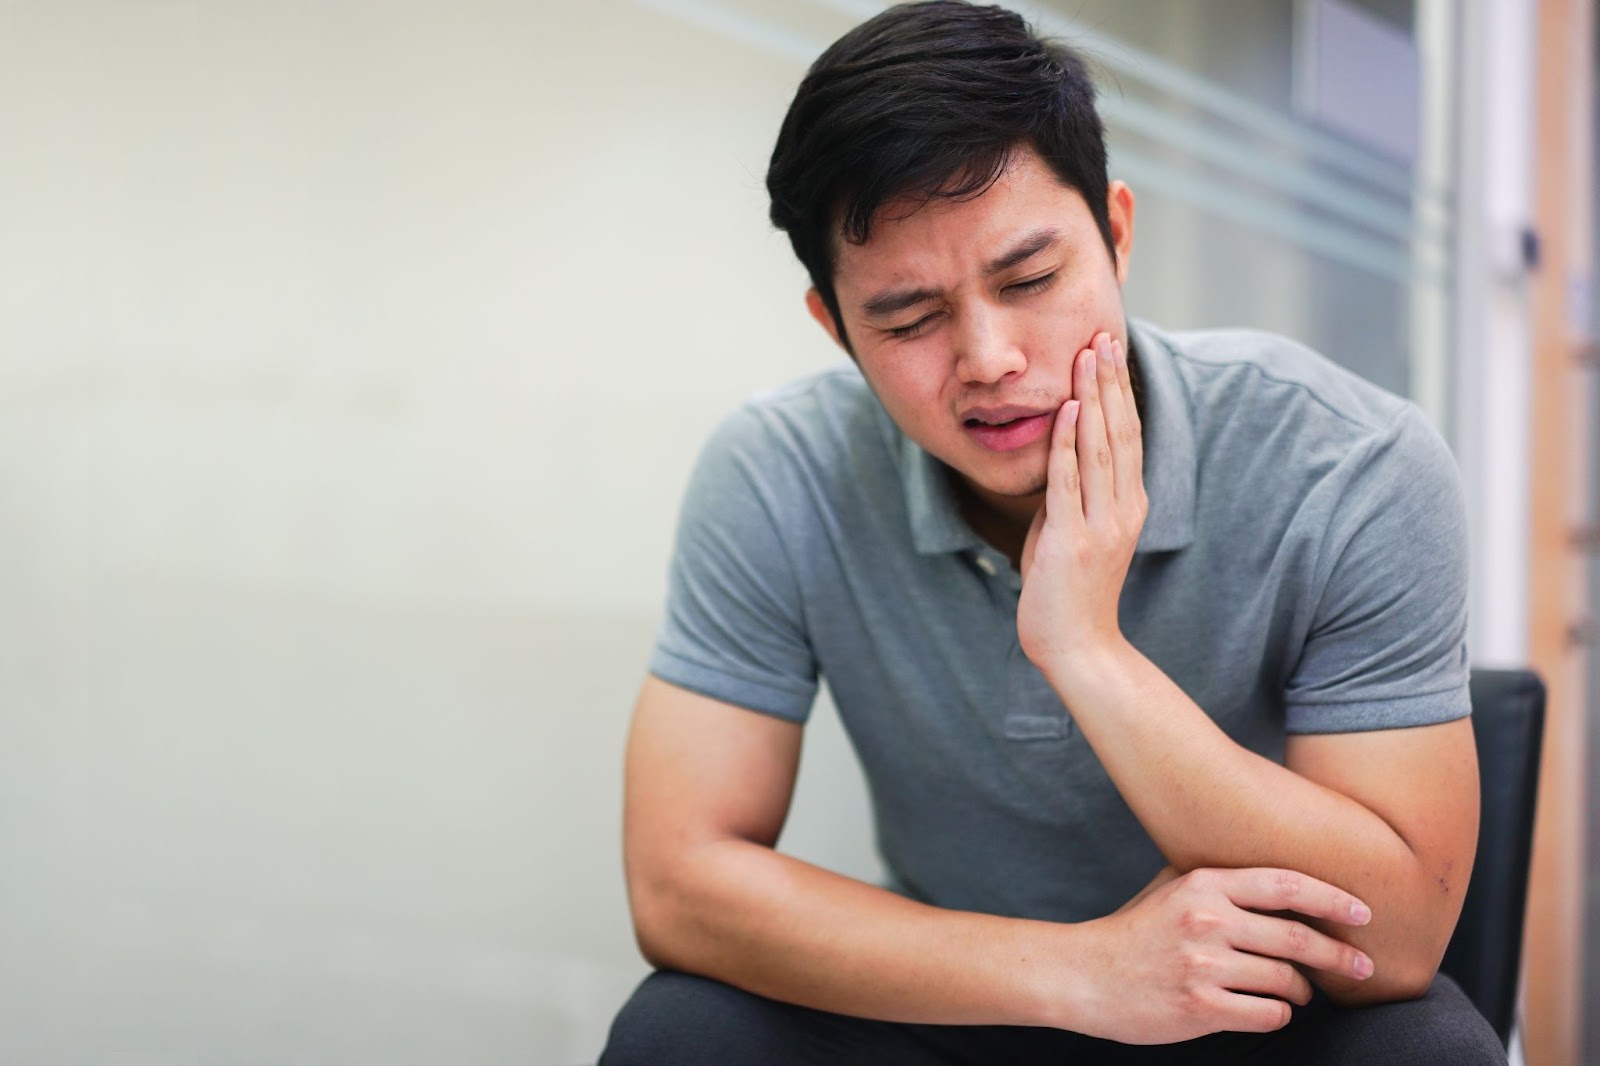 Having pain in your mouth? Northeast Arkansas Center for Oral and Maxillofacial Surgery shares how a root canal may solve the issue.